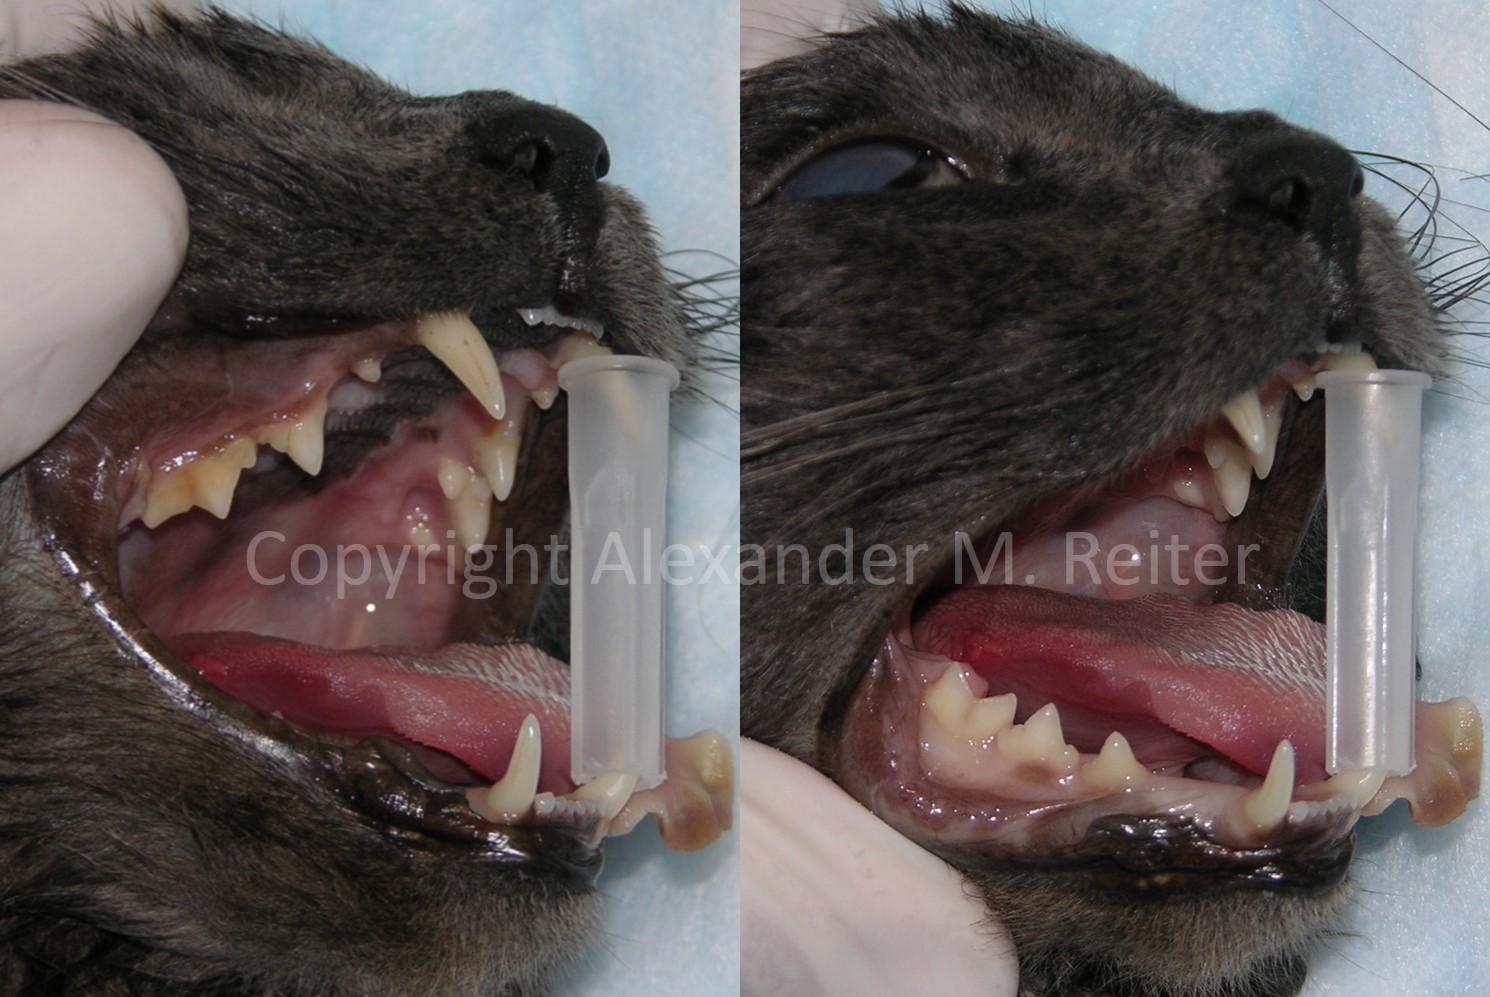 Can you use spring loaded mouth gags in veterinary medicine? | VETgirl Veterinary Continuing Education Blogs